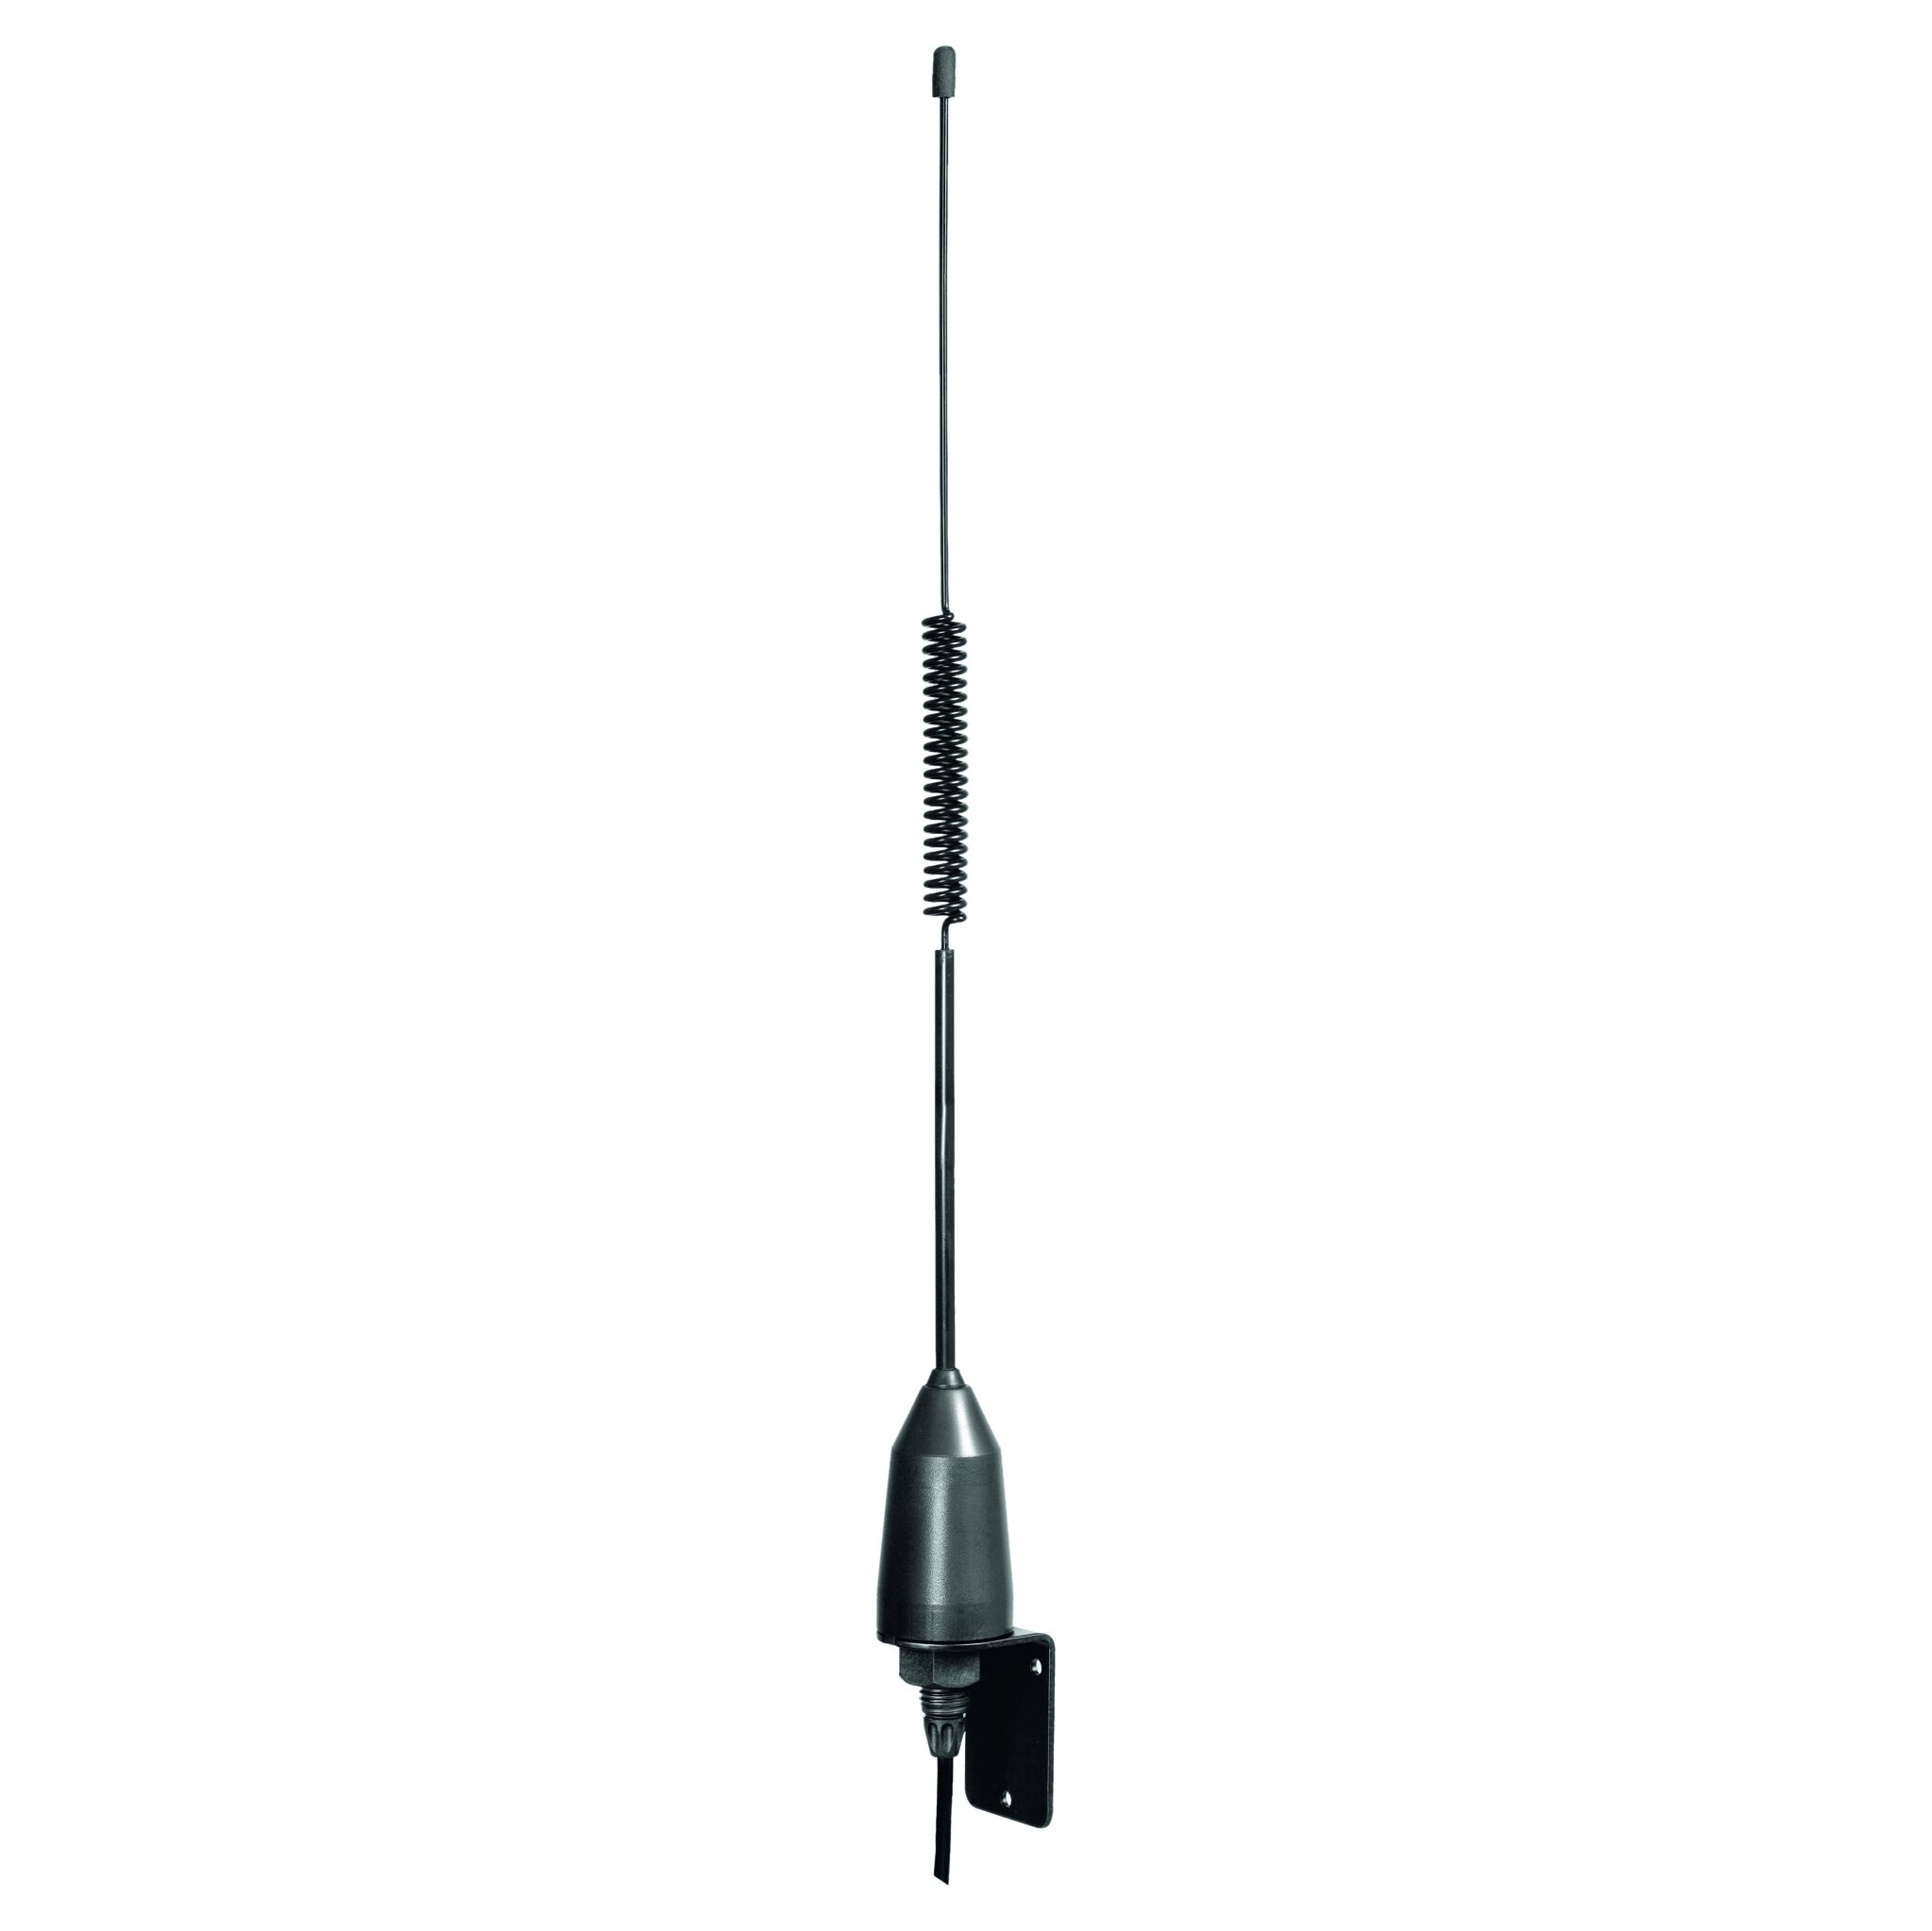 Shakespeare VHF radio antenna for inflatable boats